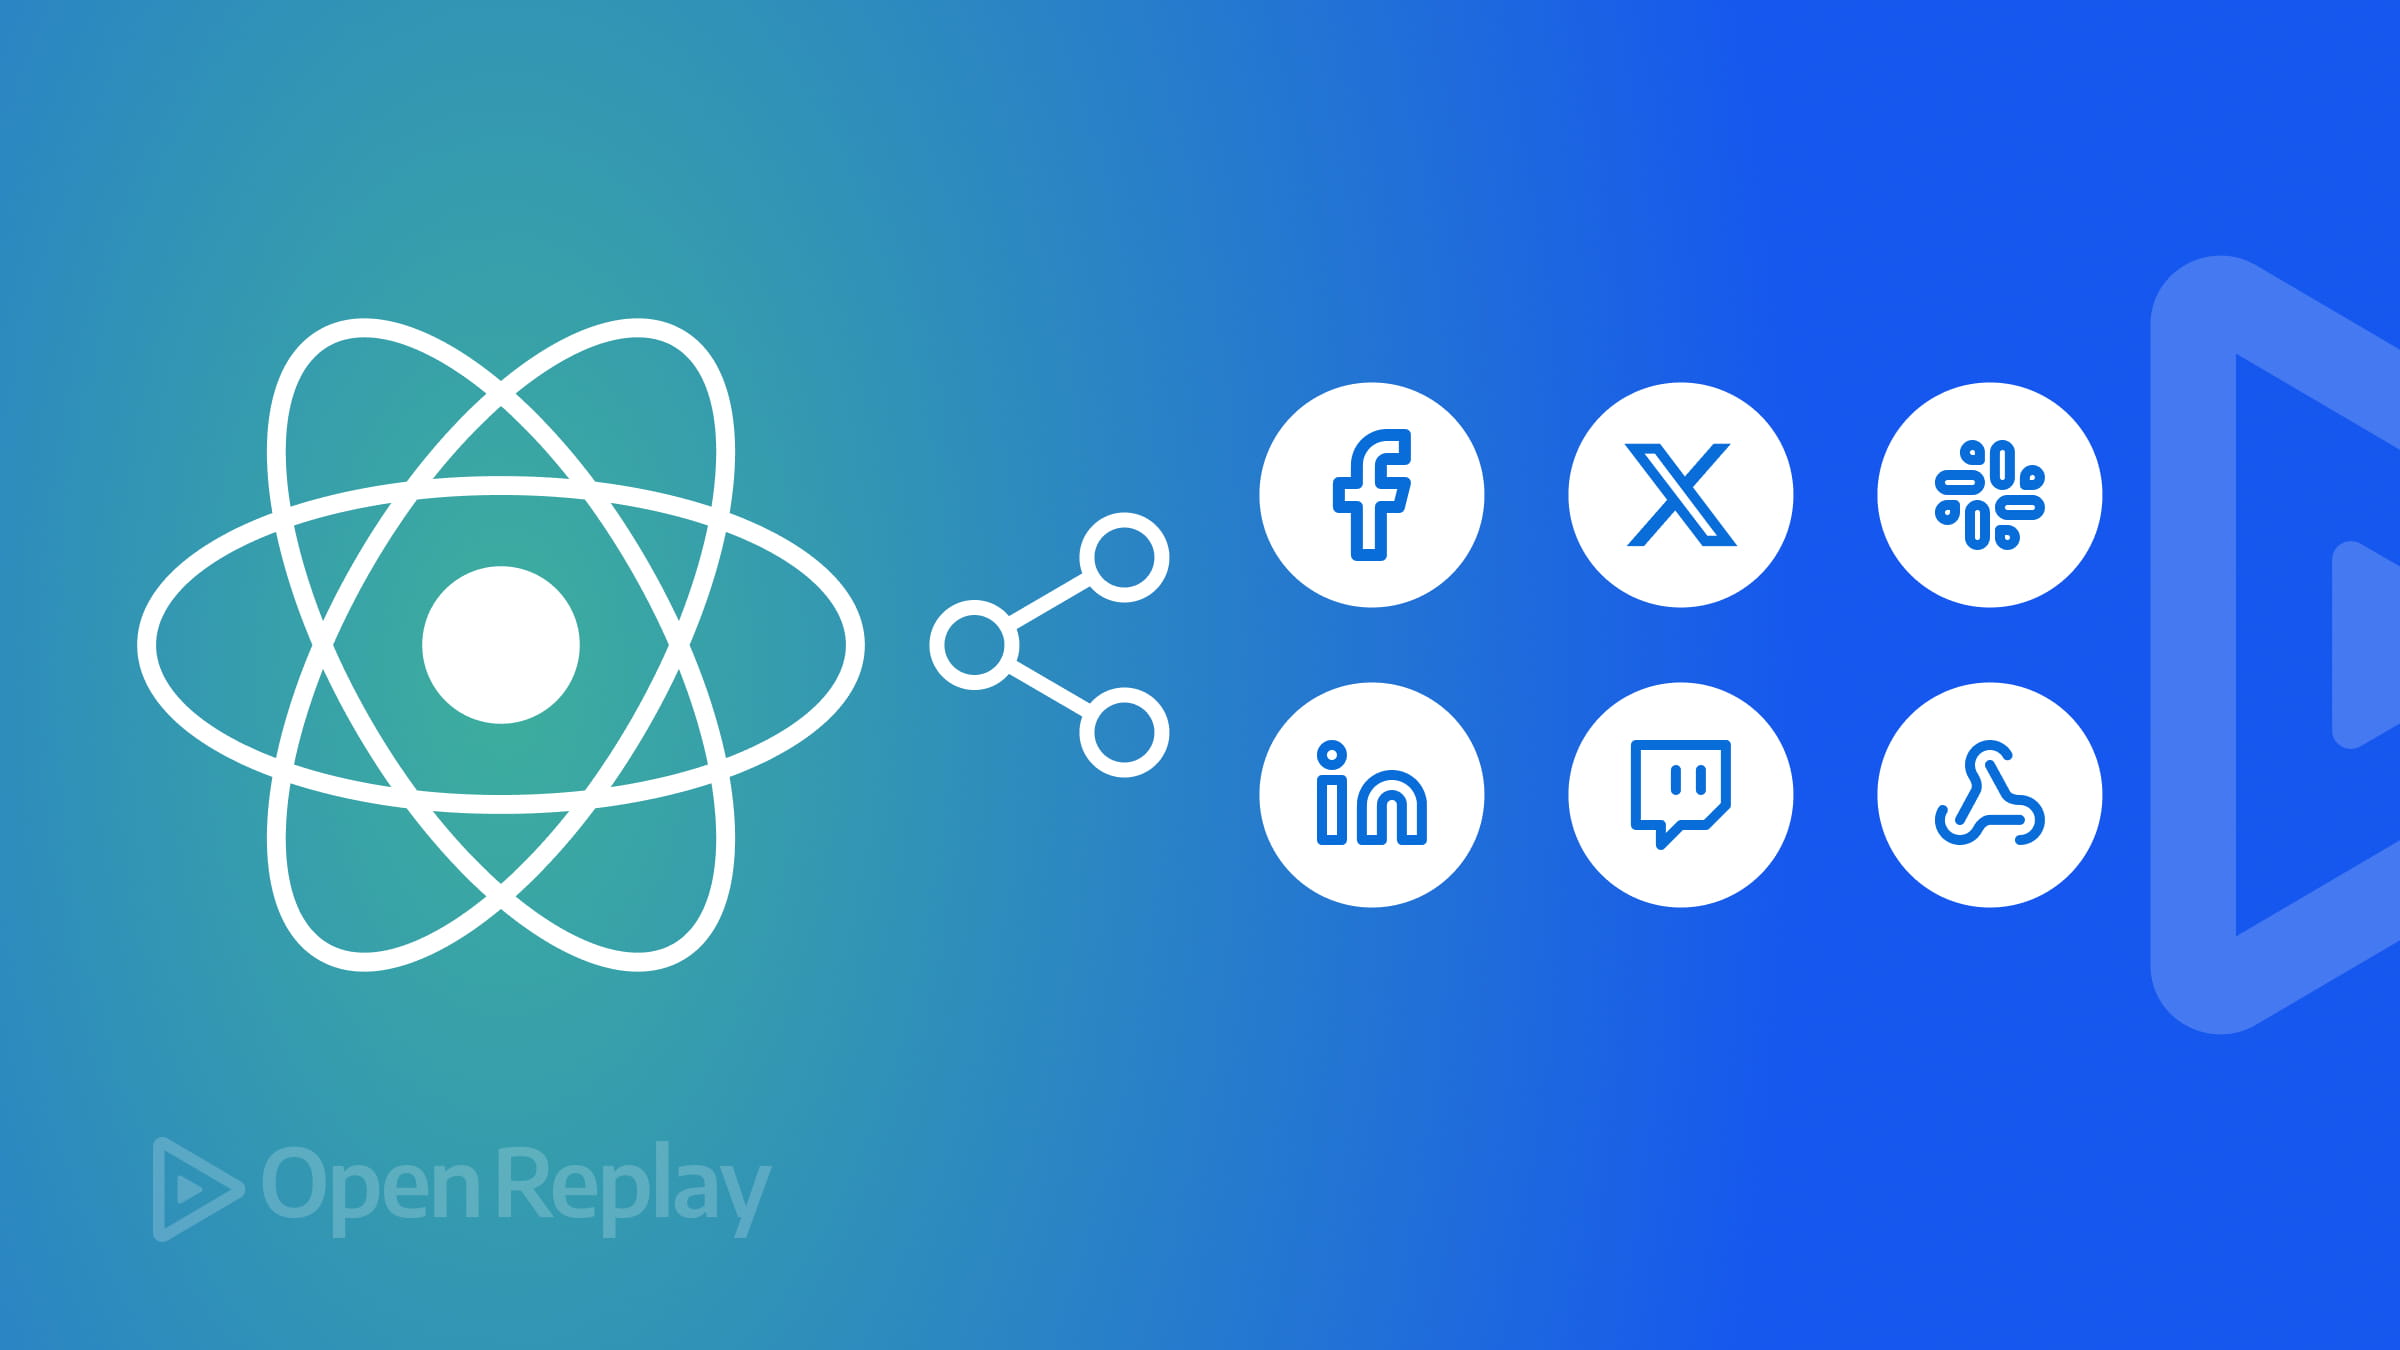 Adding Social Sharing Features to React Apps